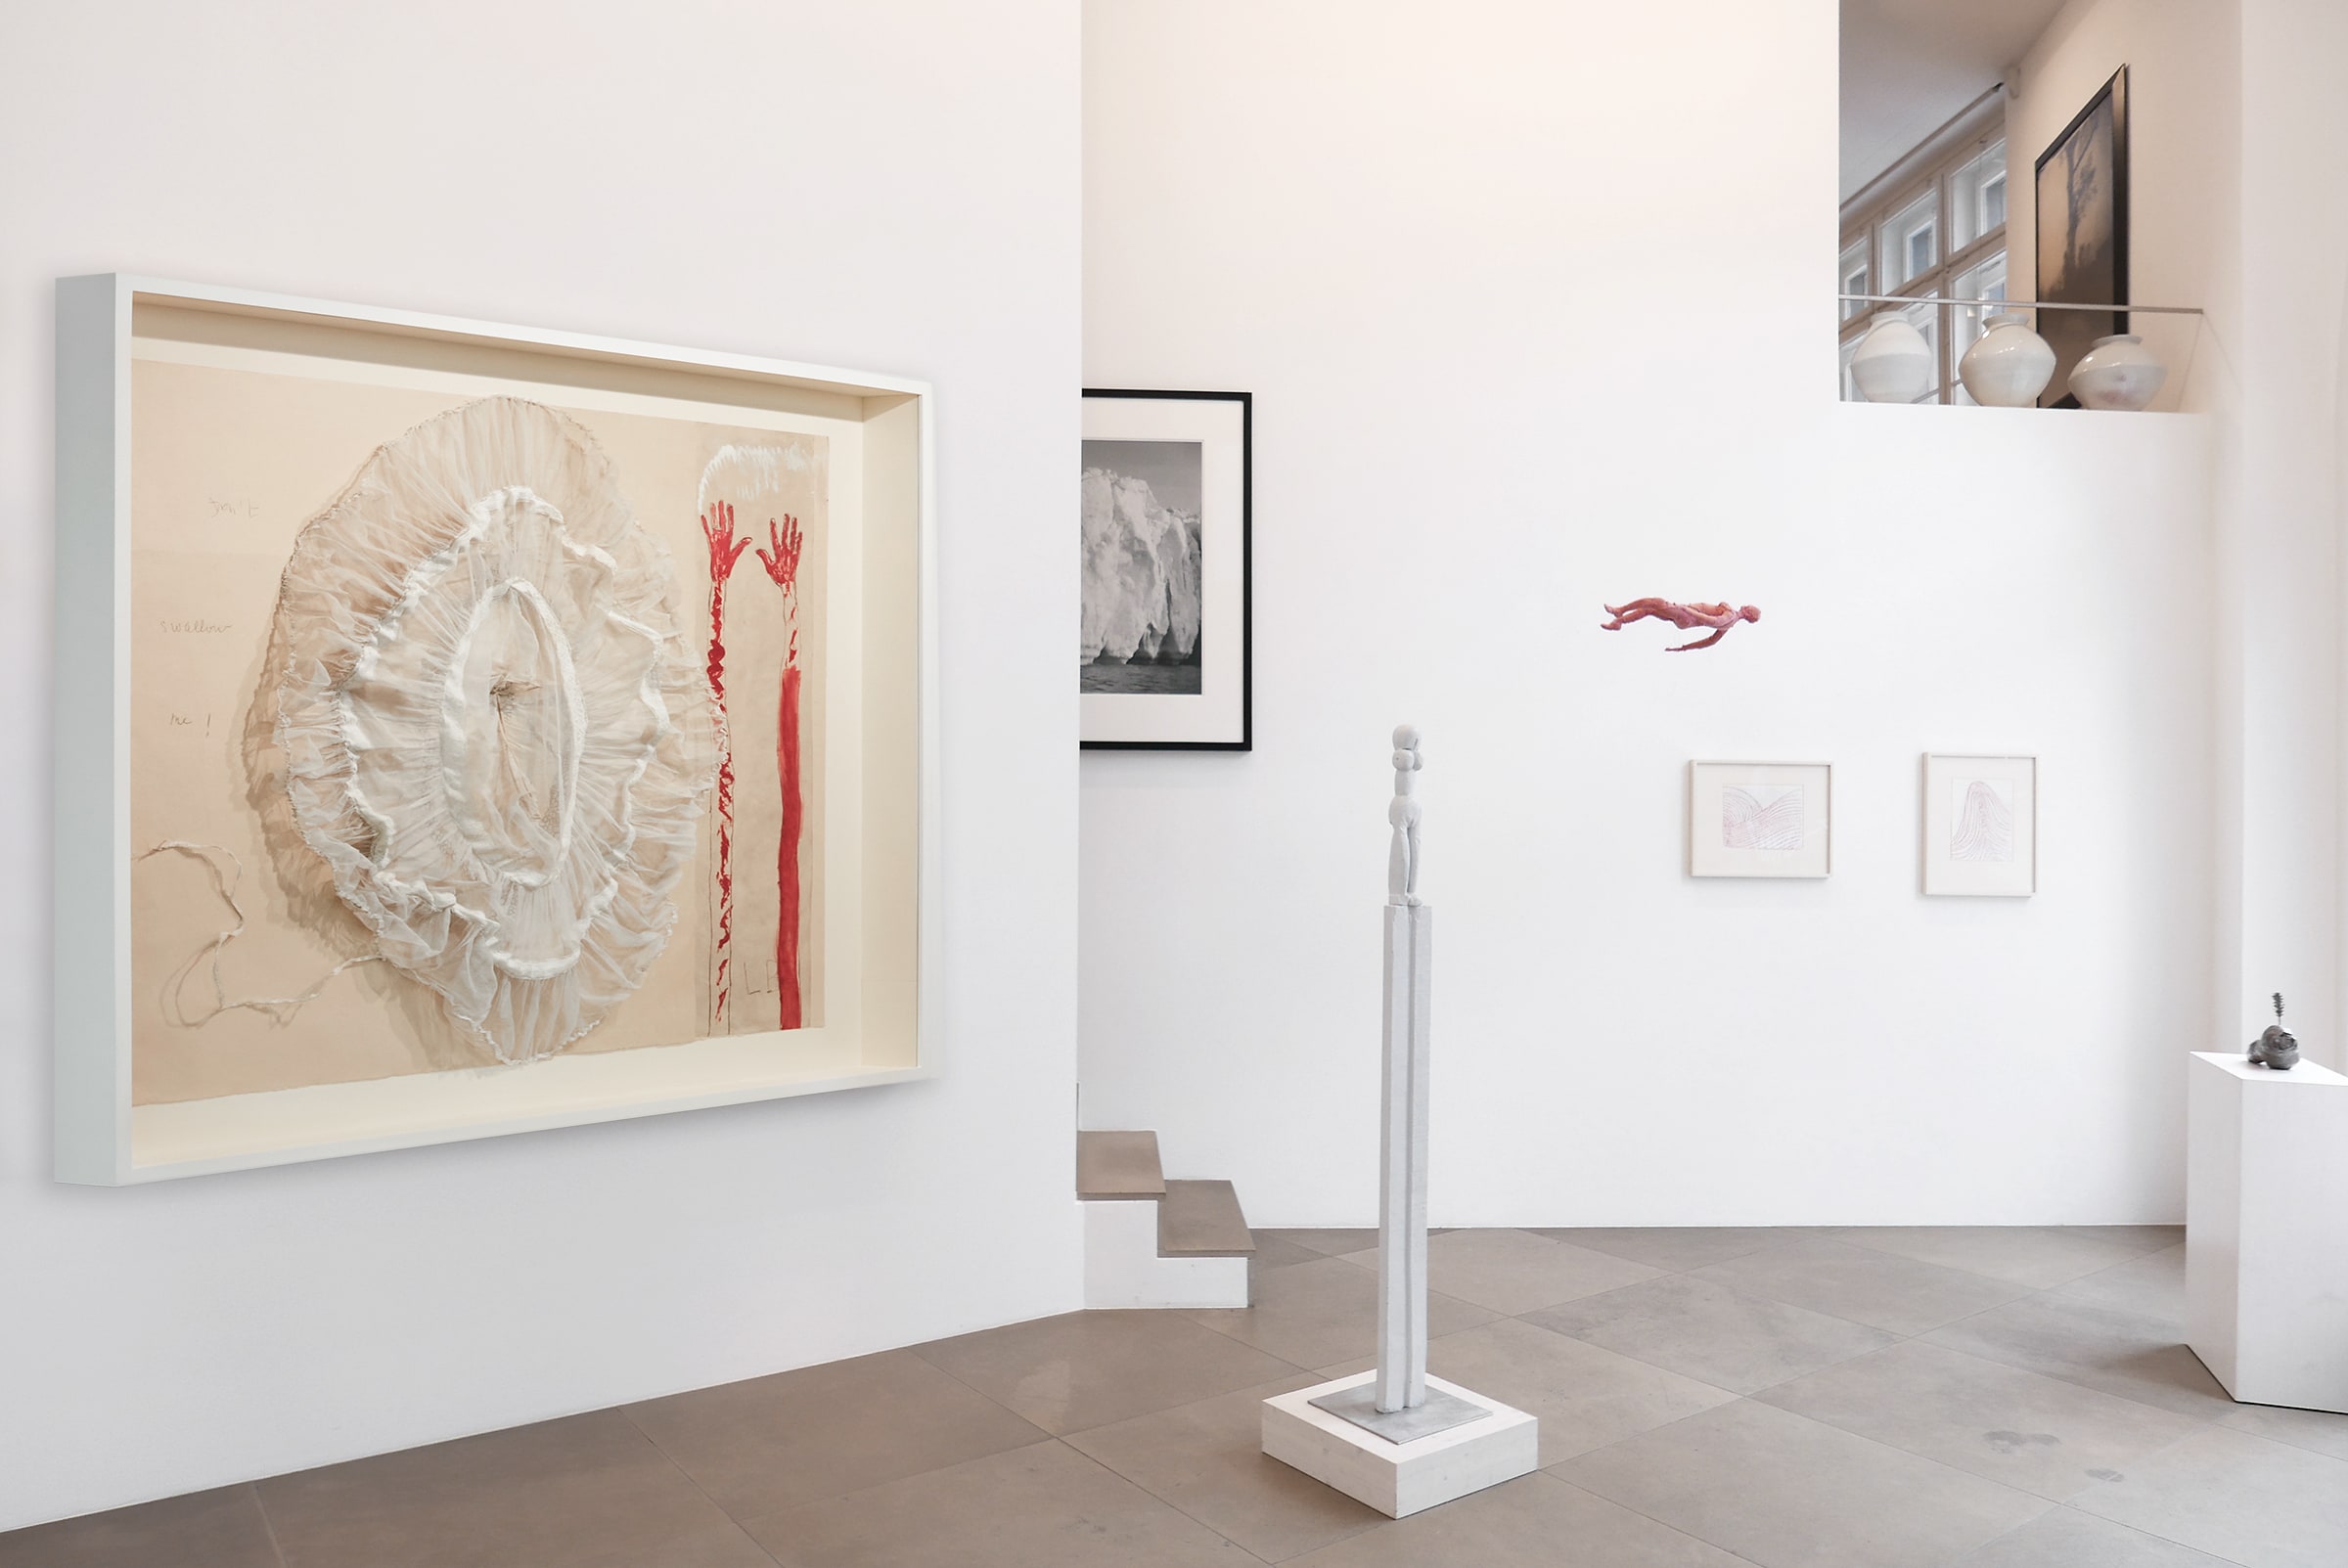 Installation view of the exhibition ‘Leading and Emerging Women Artists’, Galerie Karsten Greve, St. Moritz. Courtesy of Galerie Karsten Greve.